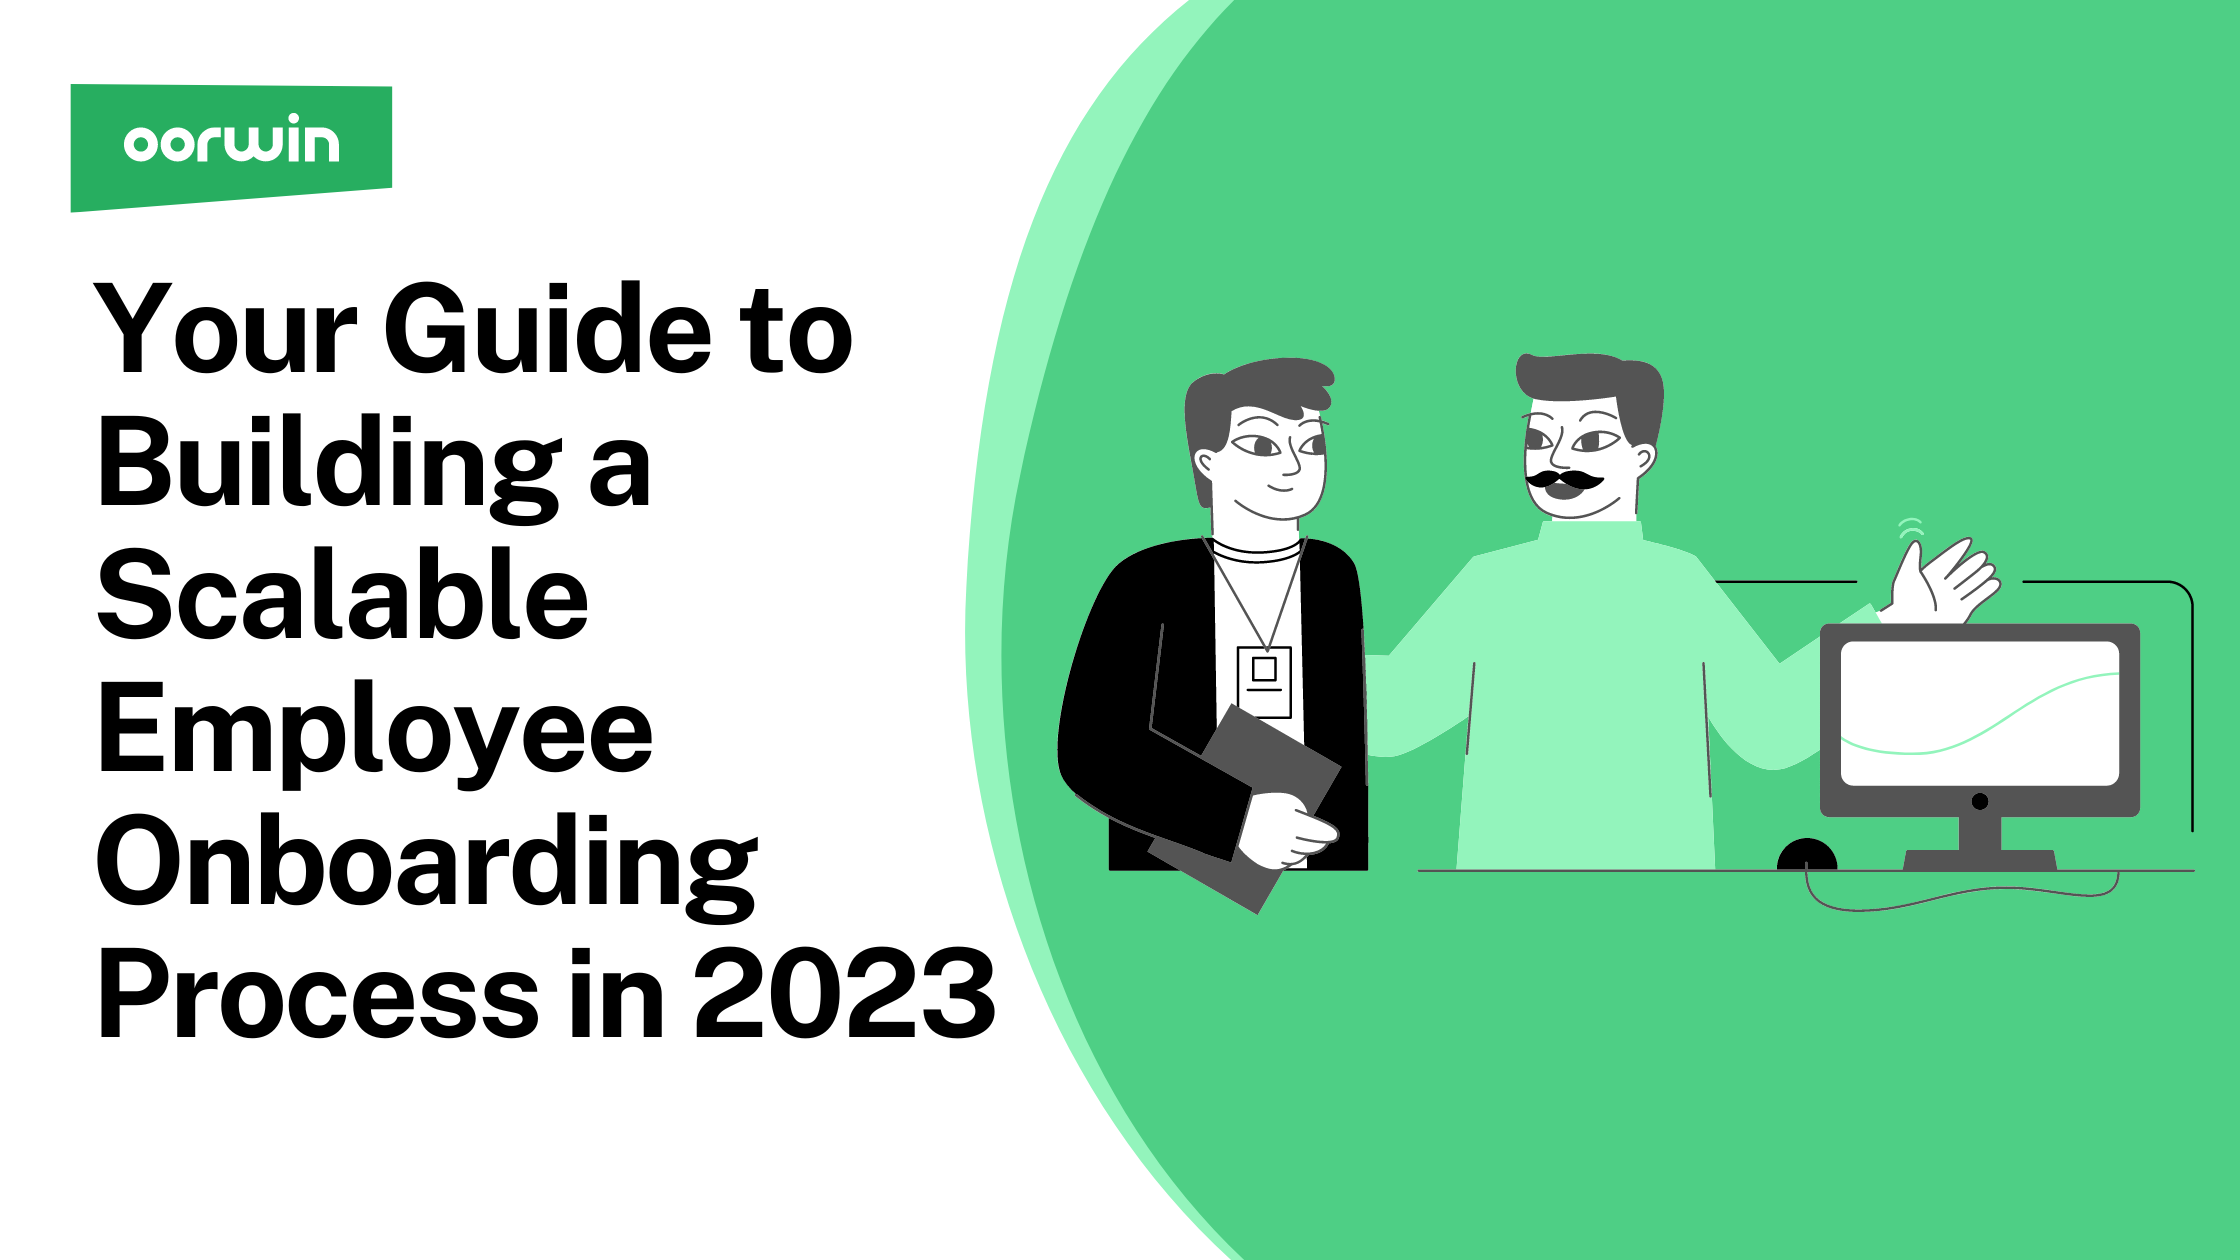 How to Build a Scalable Employee Onboarding Process in 2023